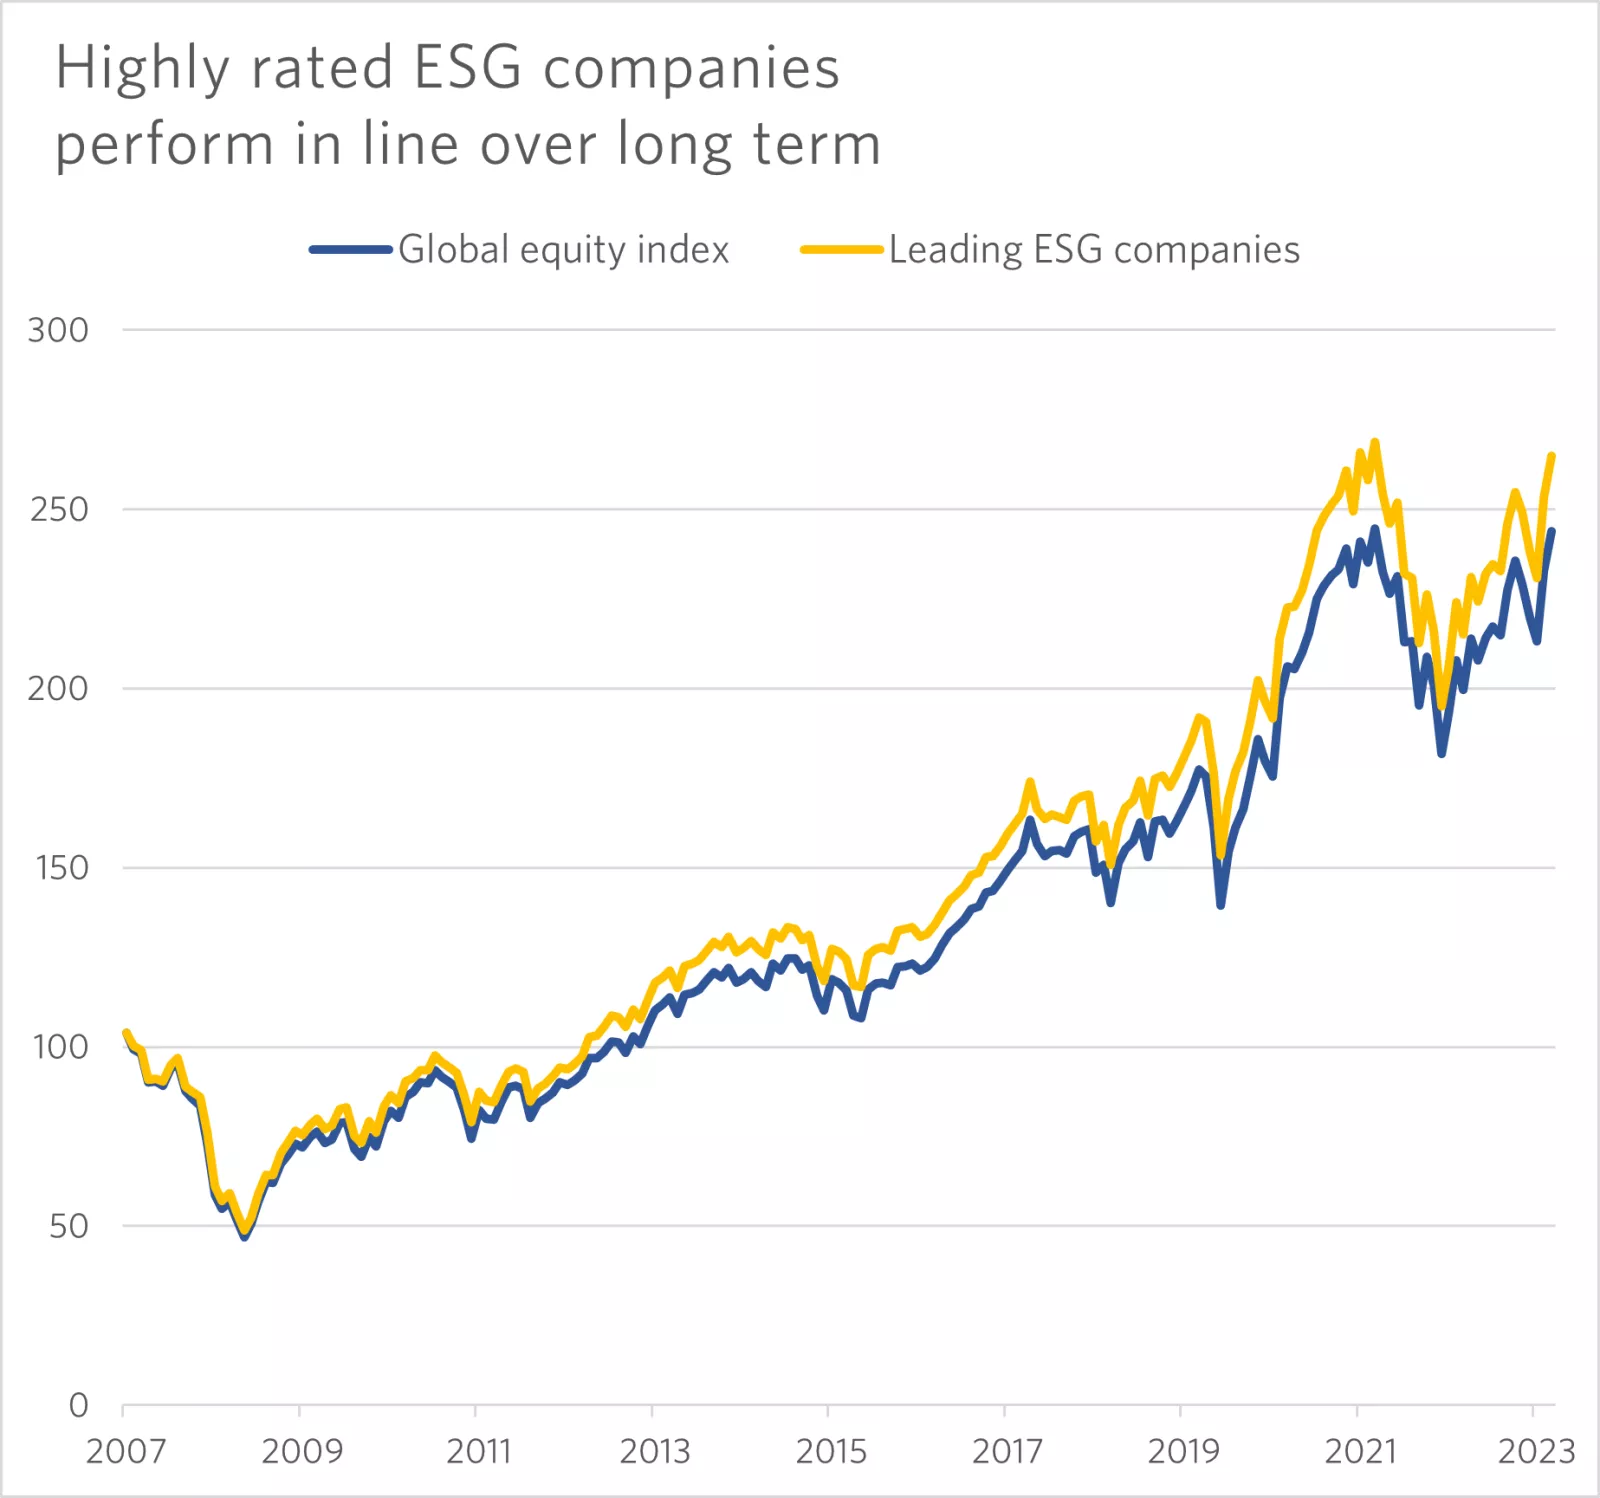 This chart shows that, from 2007 to 2023, leading ESG companies have performed in line with the global equity index.